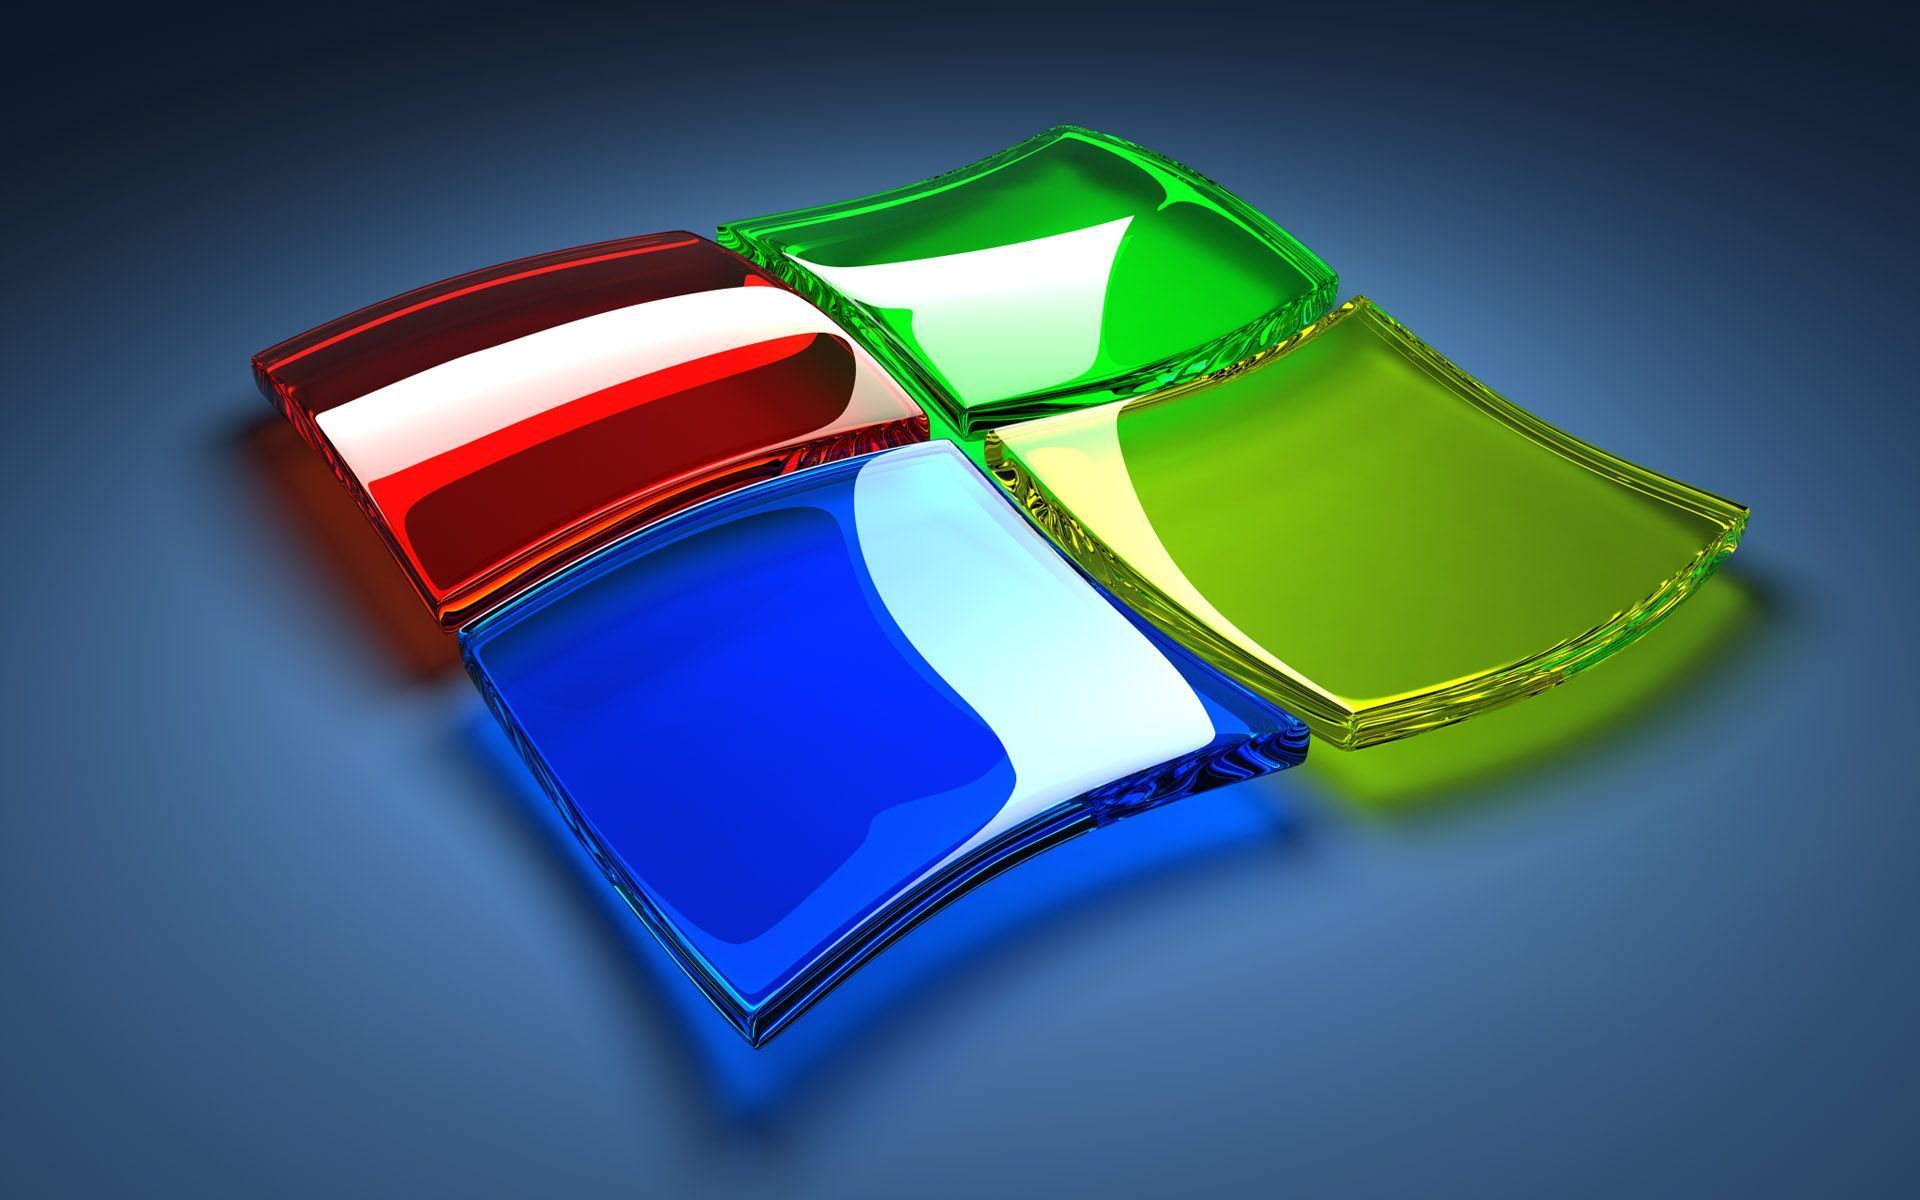 Download Microsoft Windows 8 Wallpapers Pack 2 - wallpapers - TechMynd